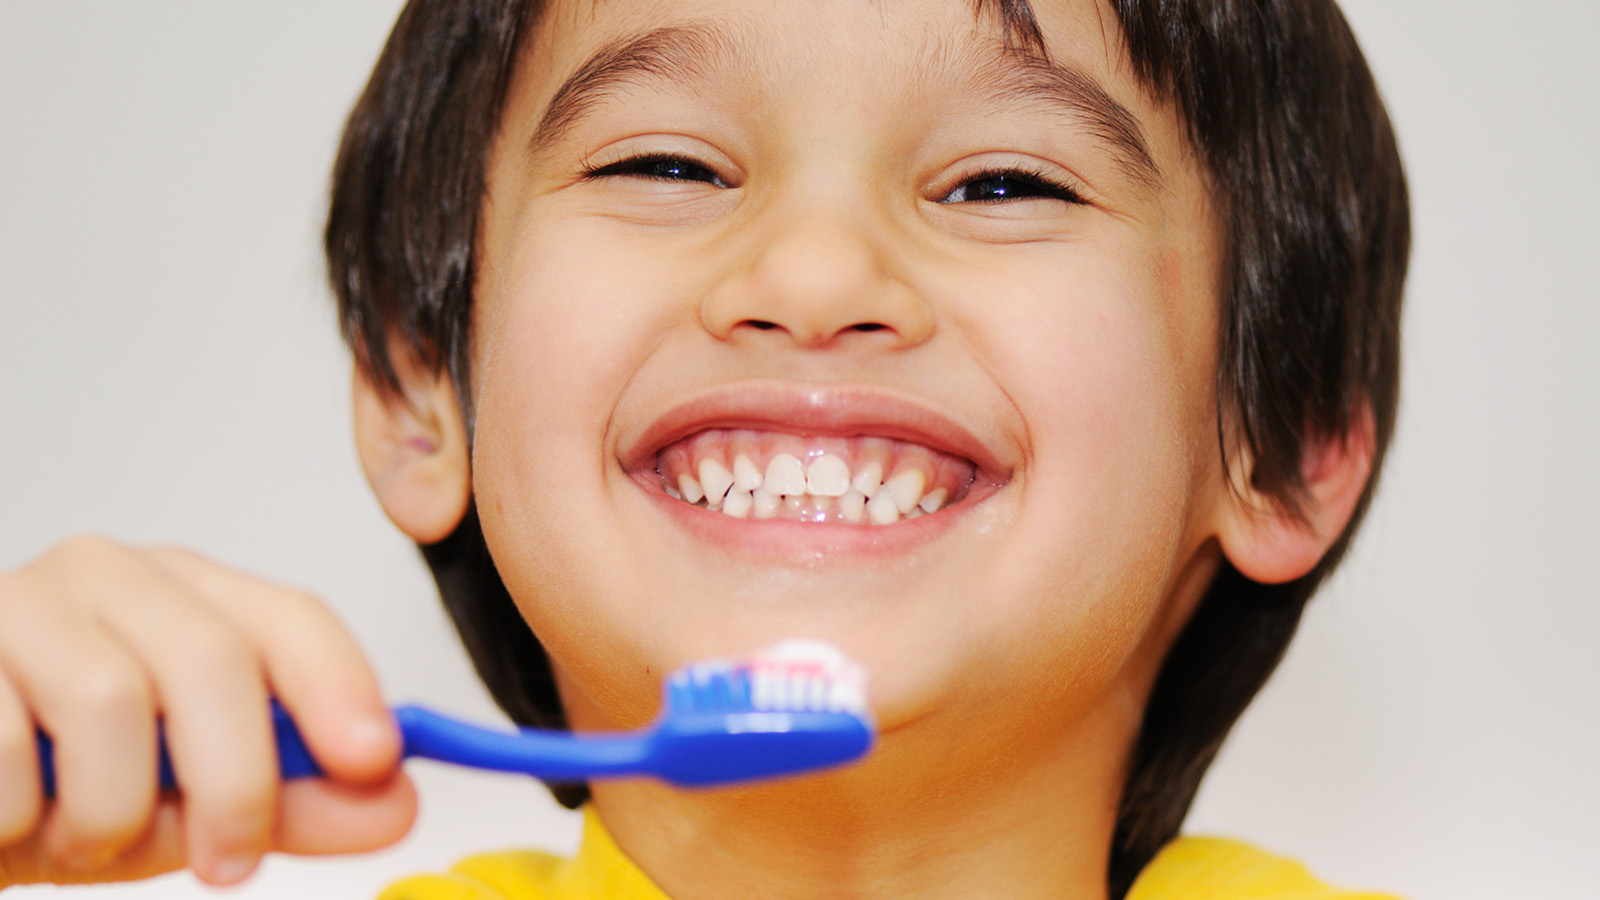 Child holding a tooth brush to brush his teeth